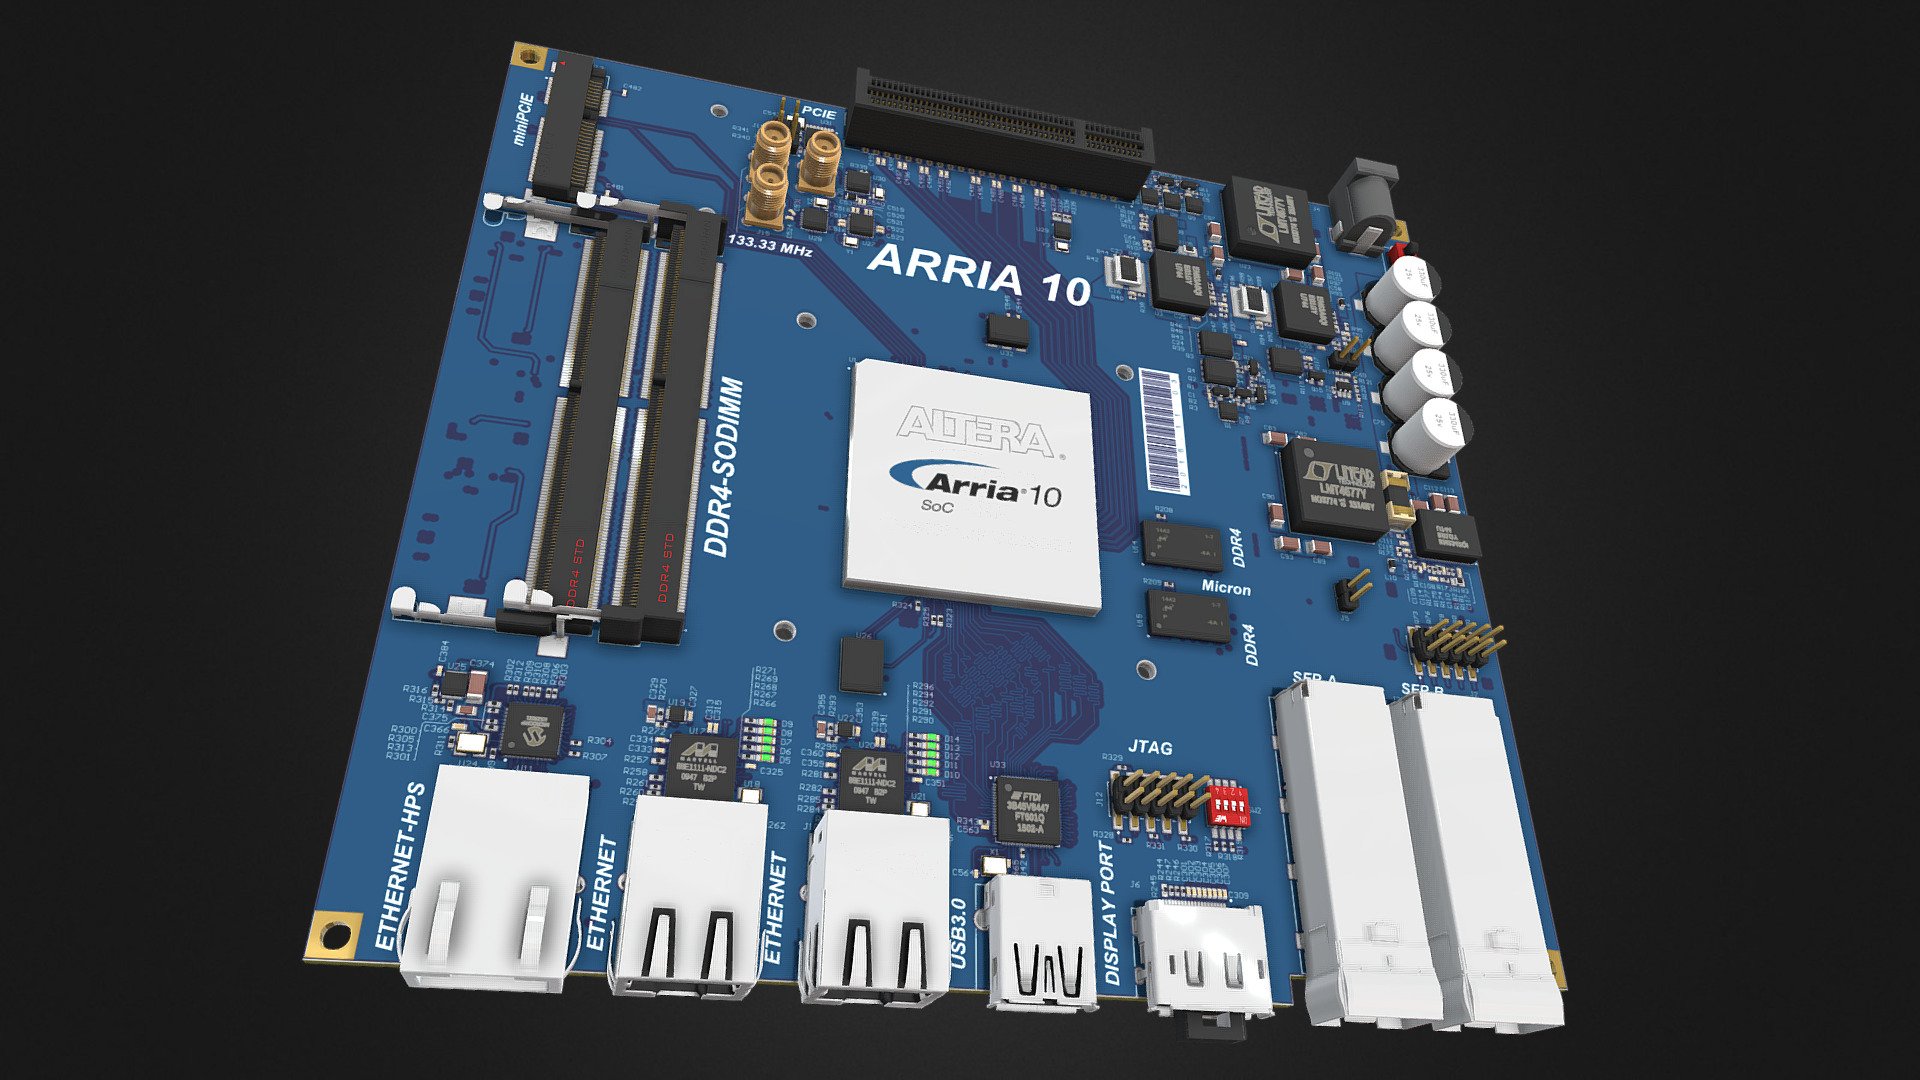 A high Poly 3D VIEW of the Mini PC project that we can found in altium designer tool.
This board use an ARRIA 10 INTEL / ALTERA FPGA. 2 x SFP+, 1 x USB3.0, 1 x DisplayPort, 3 x Ethernet, 2 x Slot DDR4 SODIMM and 2 x DDR4 components, 1x PciExpress, 1 x msata.

All components can be modified (translate, delete,…).
Don't hesitate to comment somes hardware references that you want to see in sketchfab 3d model